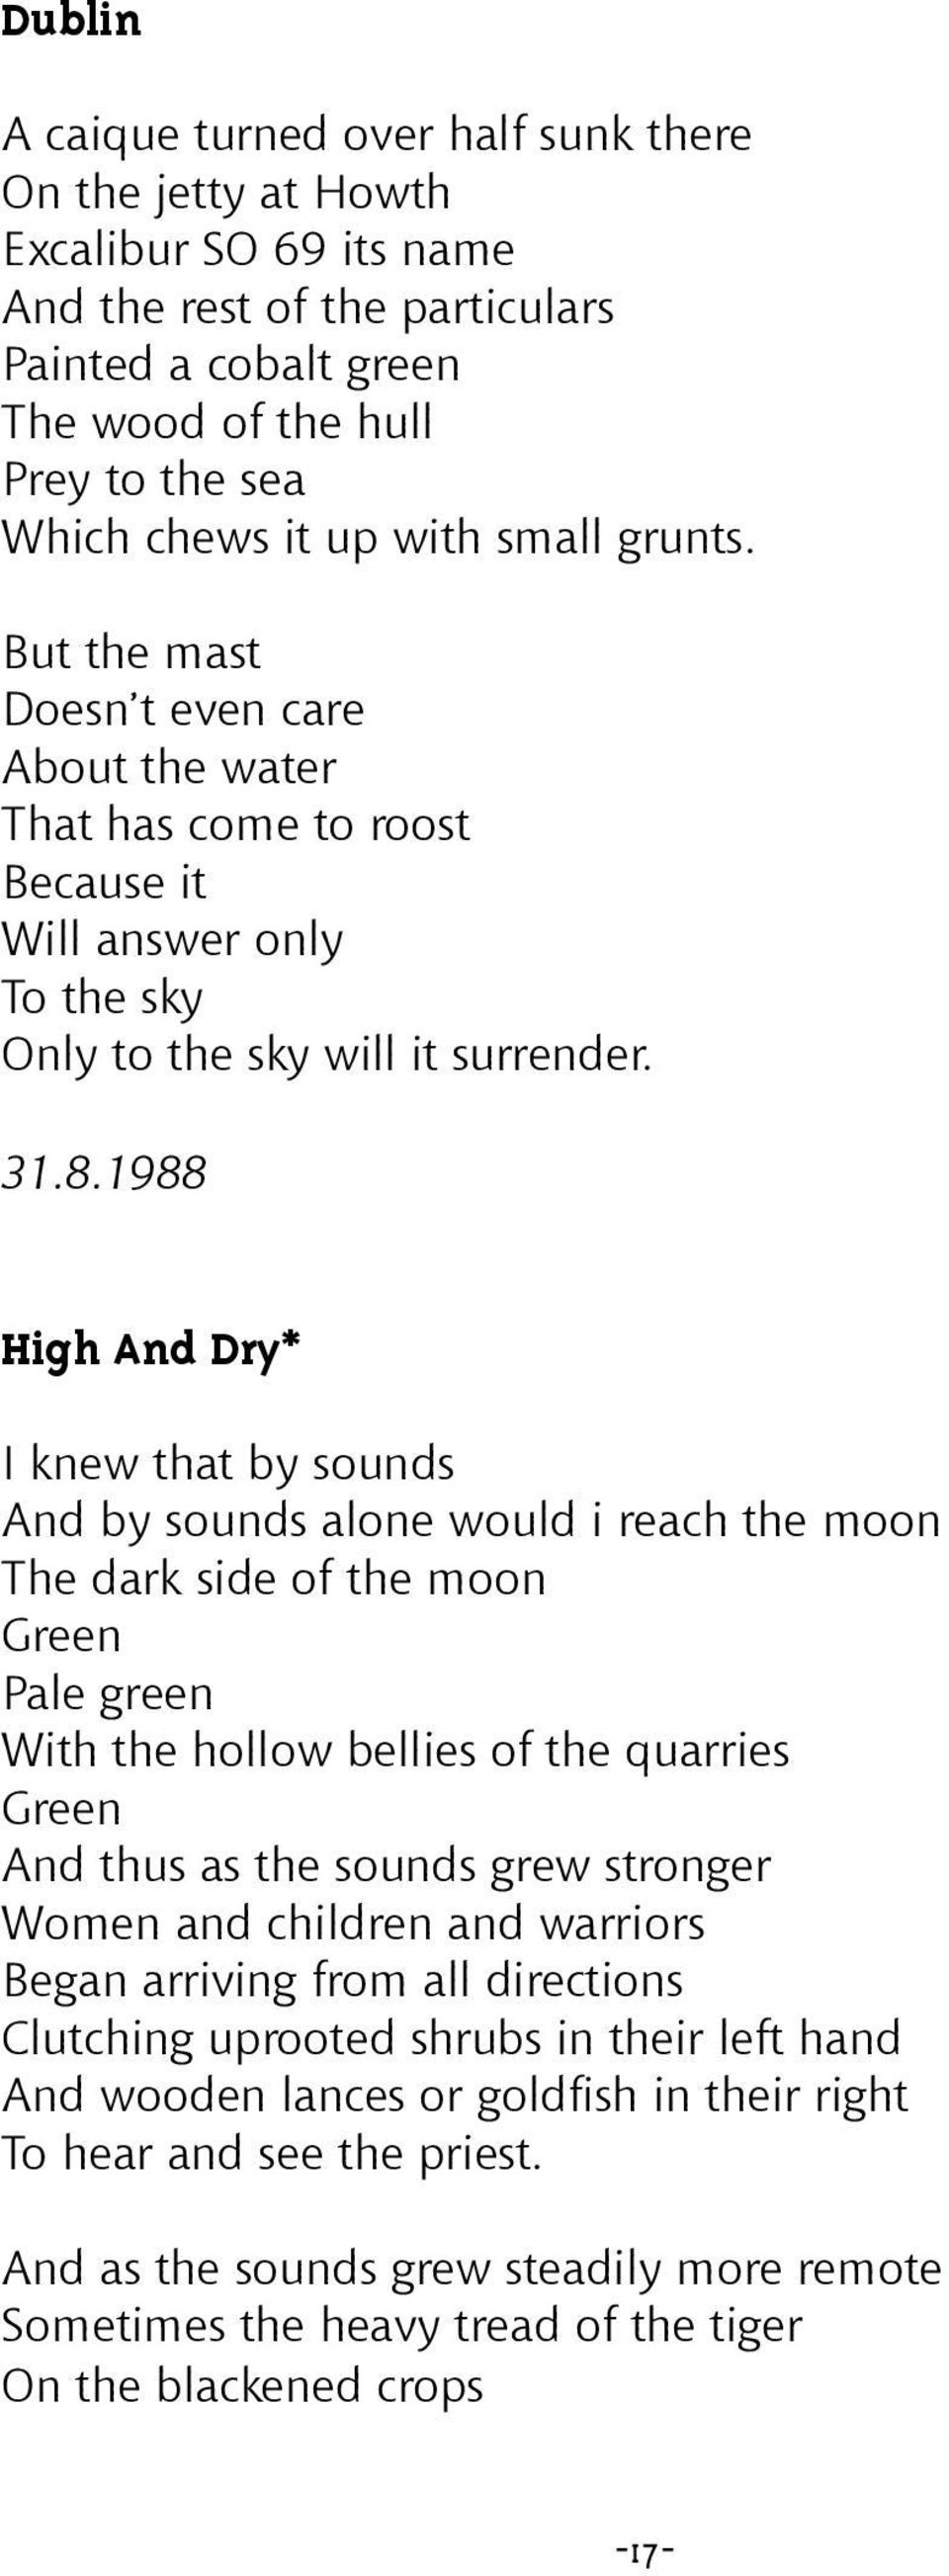 1988 High And Dry* I knew that by sounds And by sounds alone would i reach the moon The dark side of the moon Green Pale green With the hollow bellies of the quarries Green And thus as the sounds